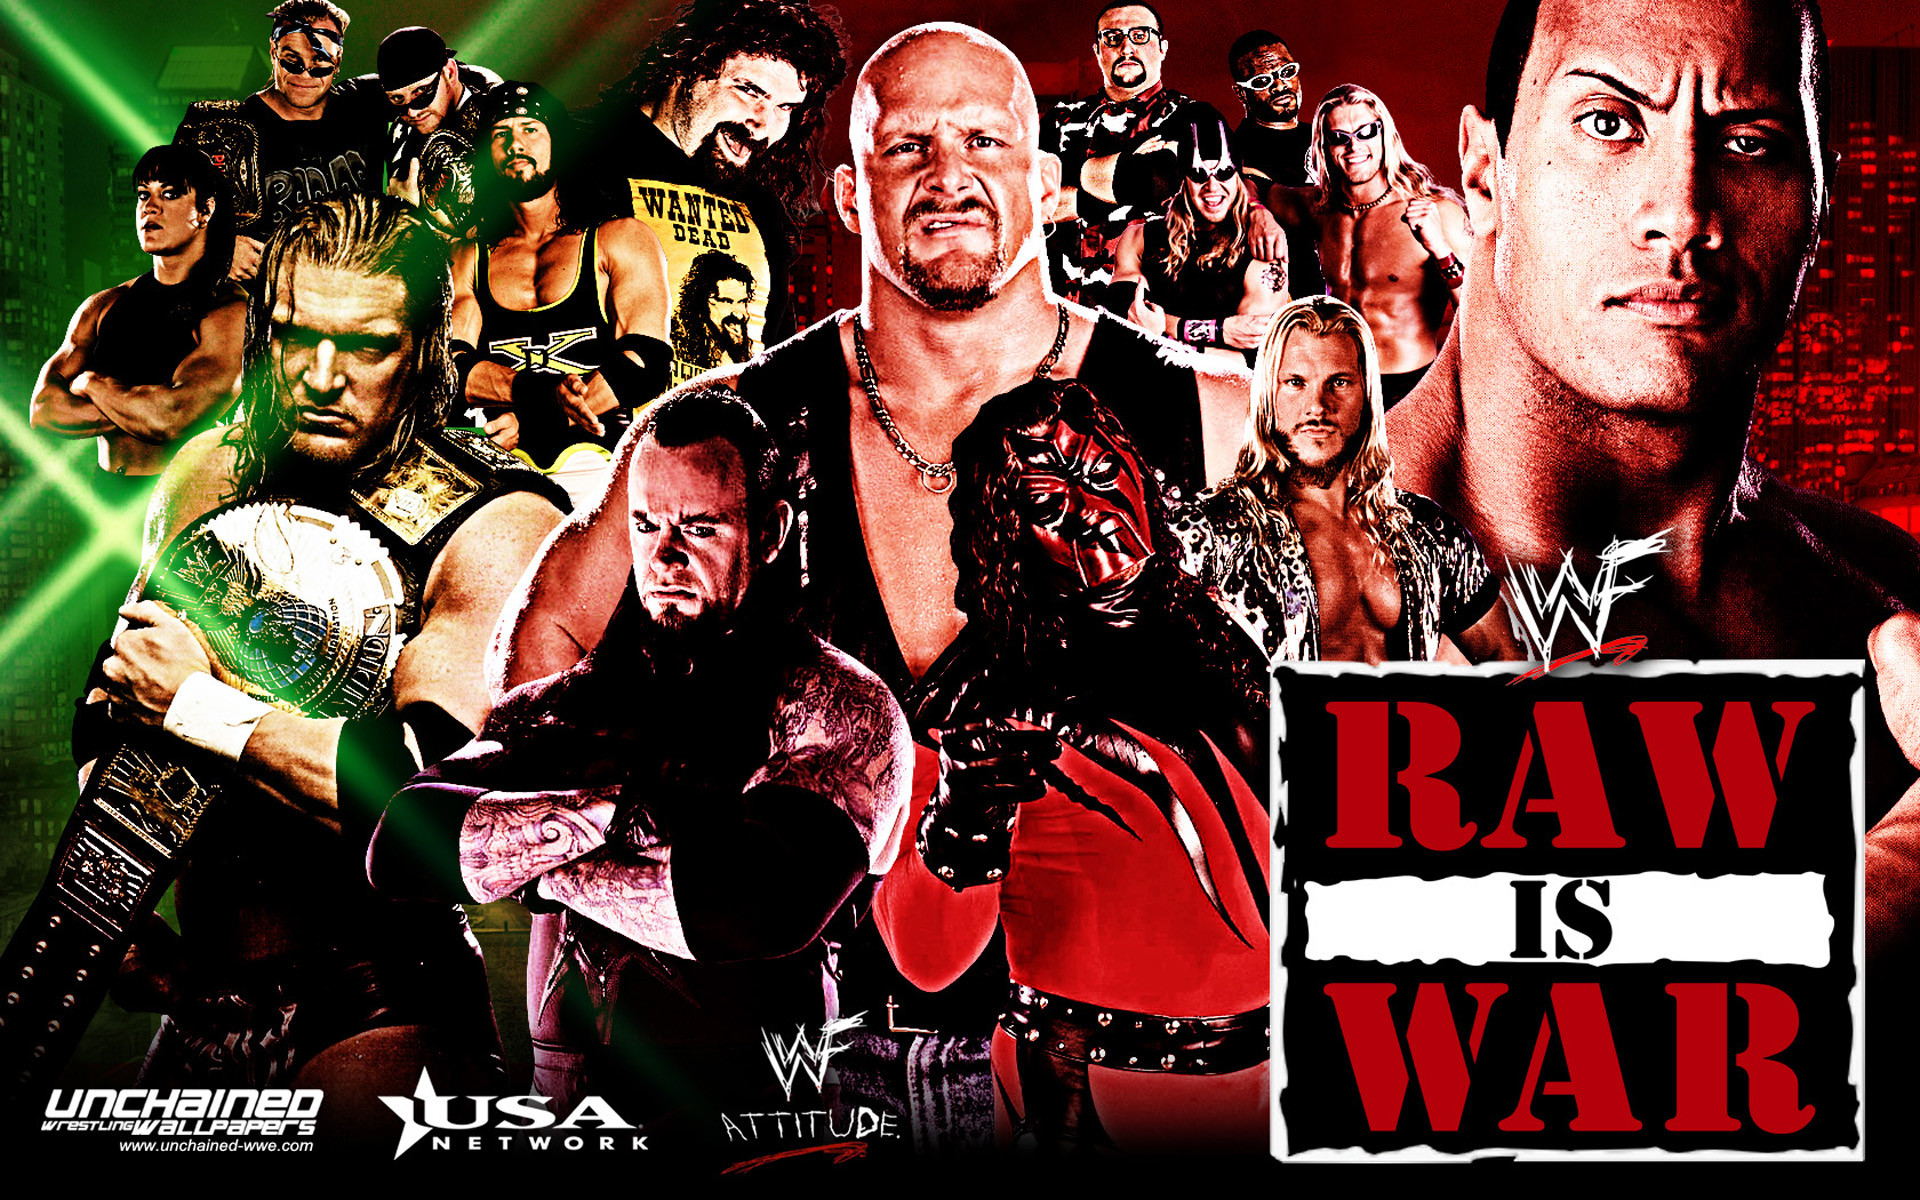 1920x1200 Wwe Wallpaper, 42 Full HDQ Wwe Images (In HDQ, #414EJ)